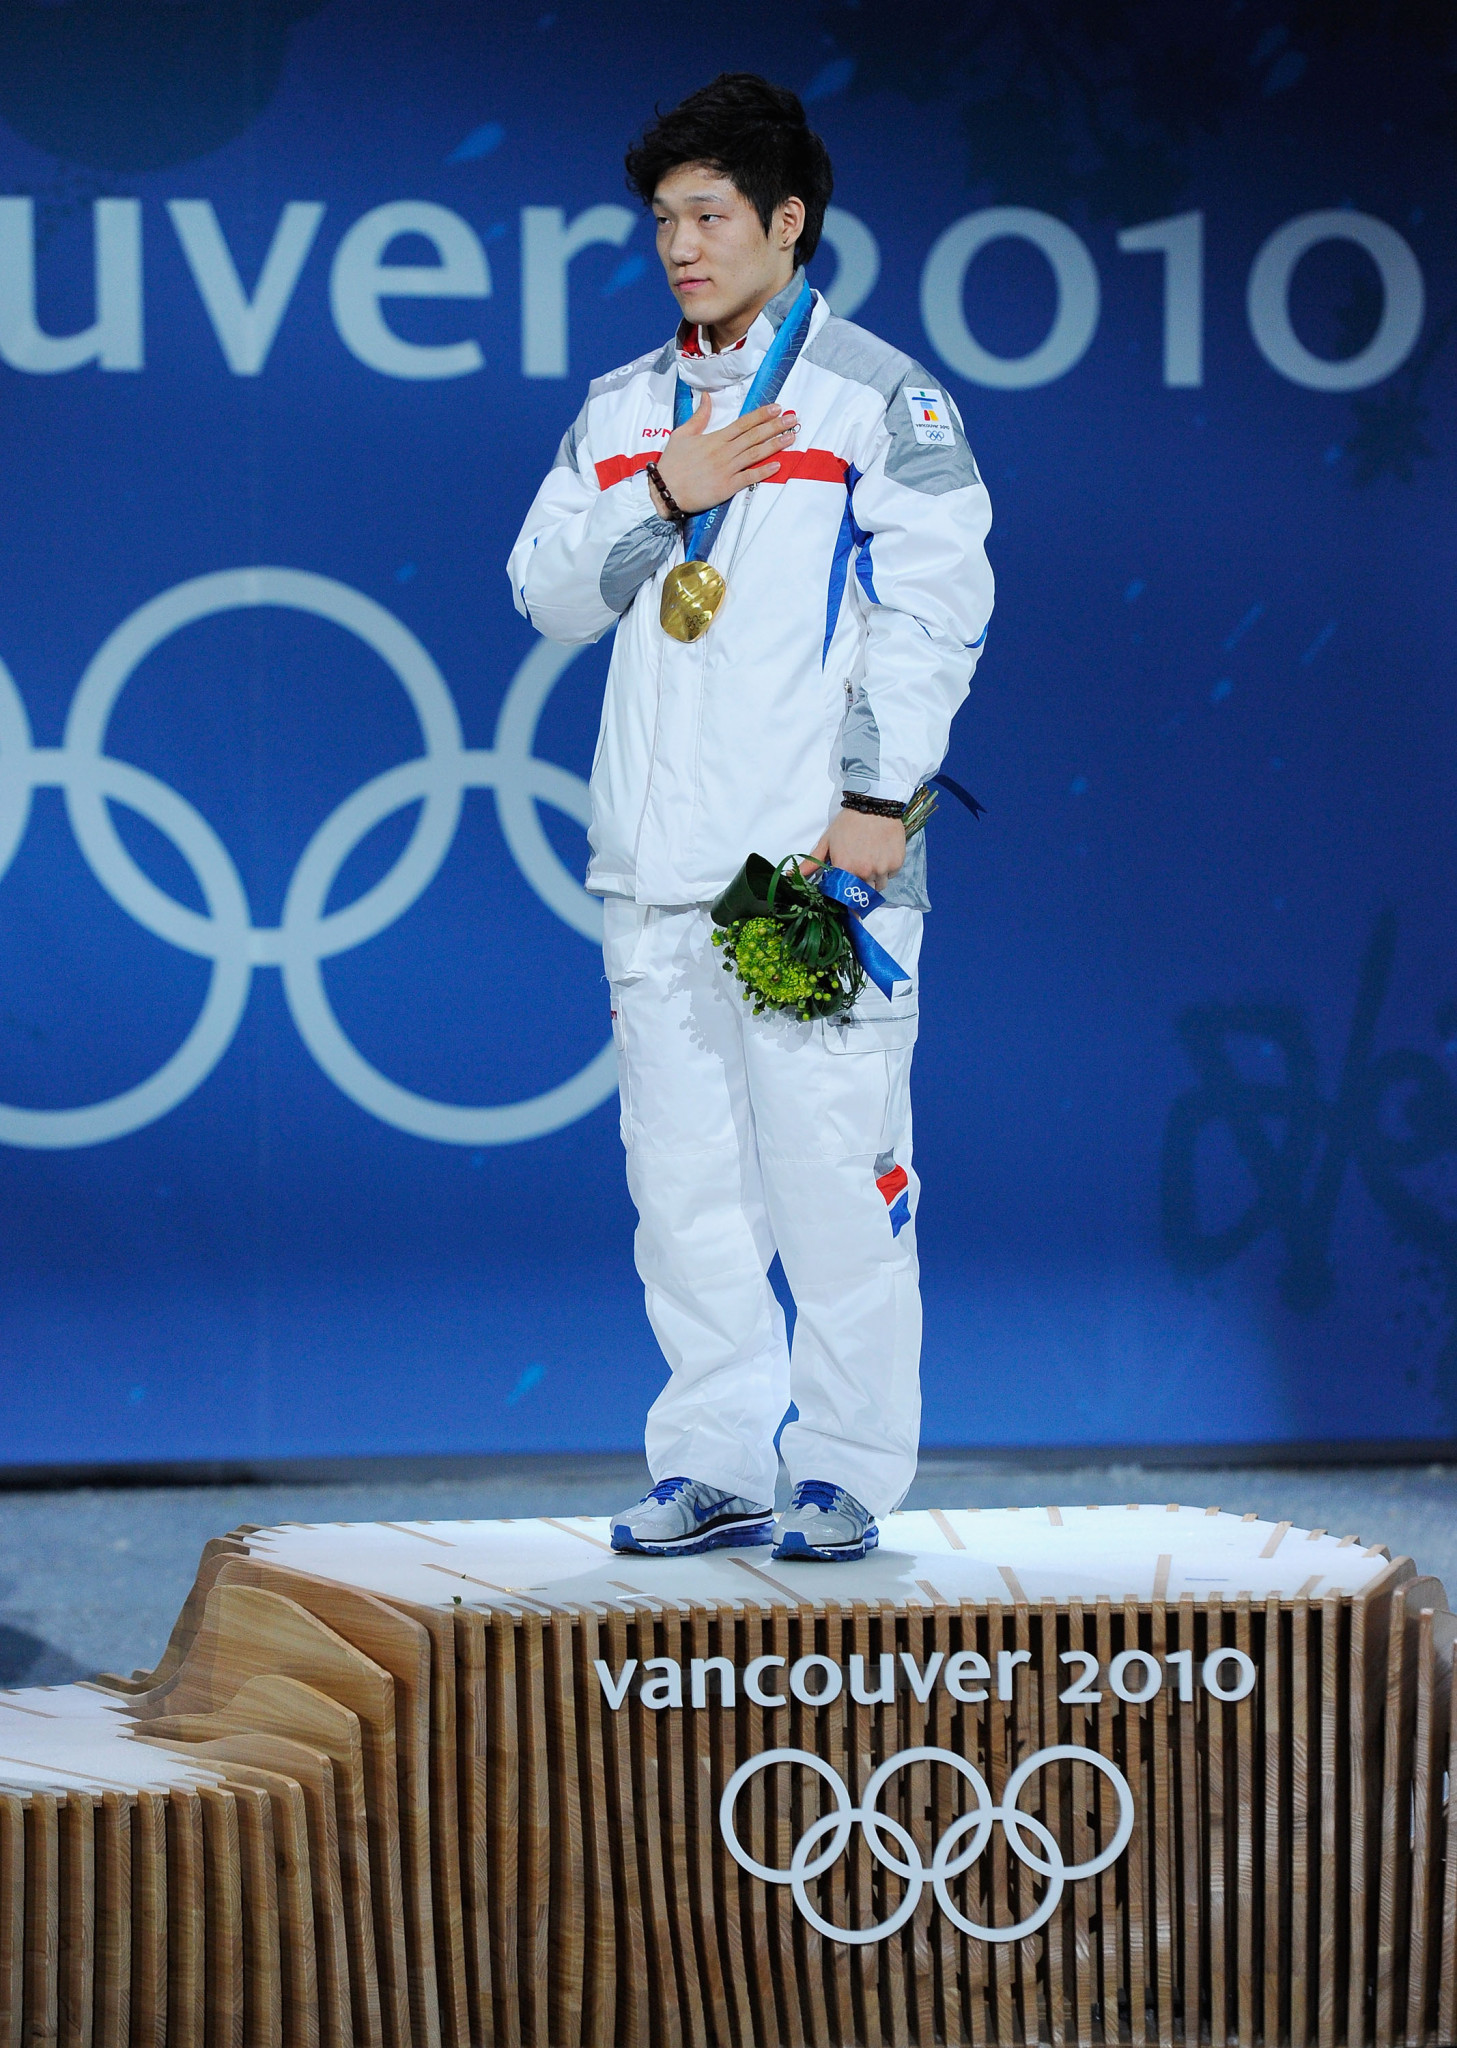 Moe Tae-bum won a shock gold medal at Vancouver 2010 ©Getty Images